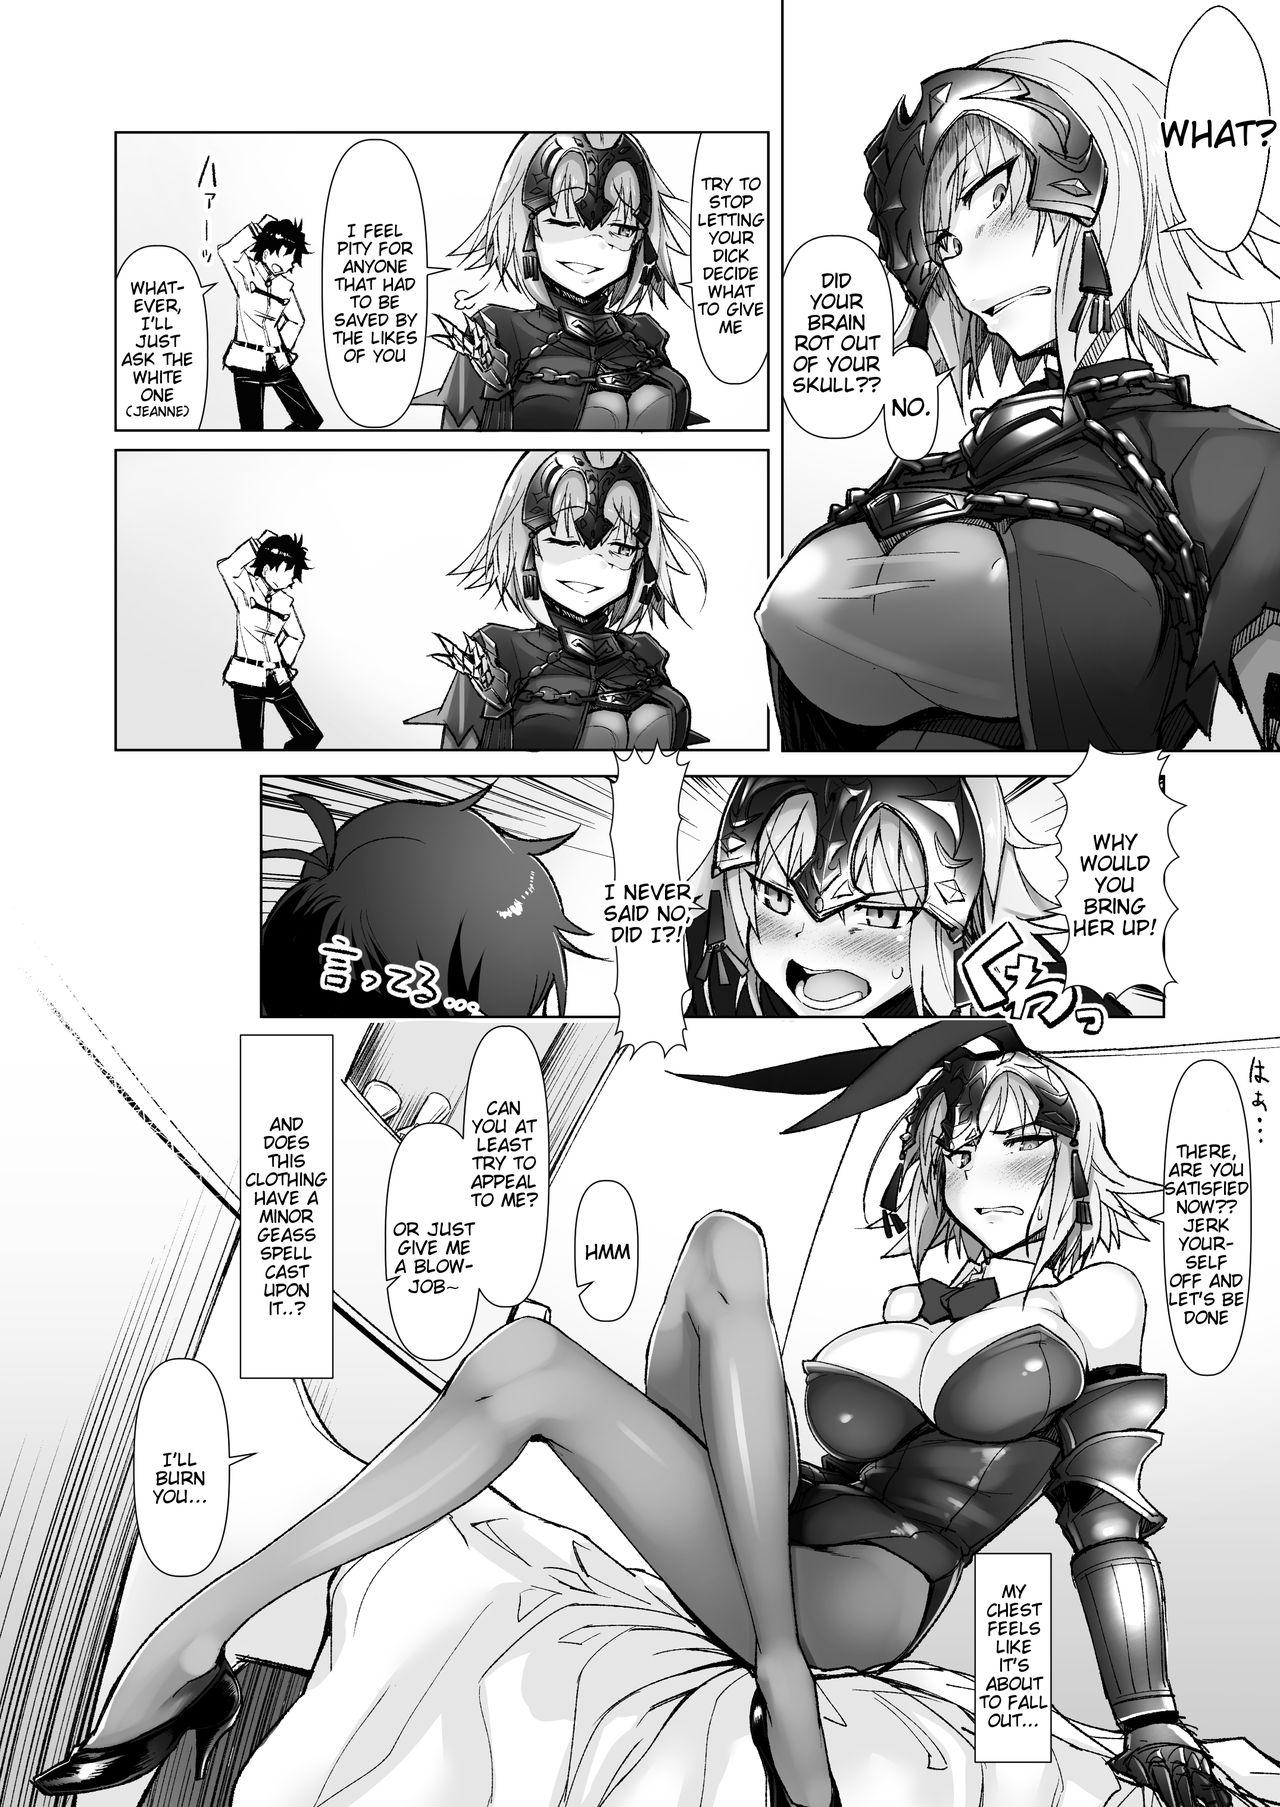 Exposed Chaldea Bunny Bu - Fate grand order Camgirl - Page 3